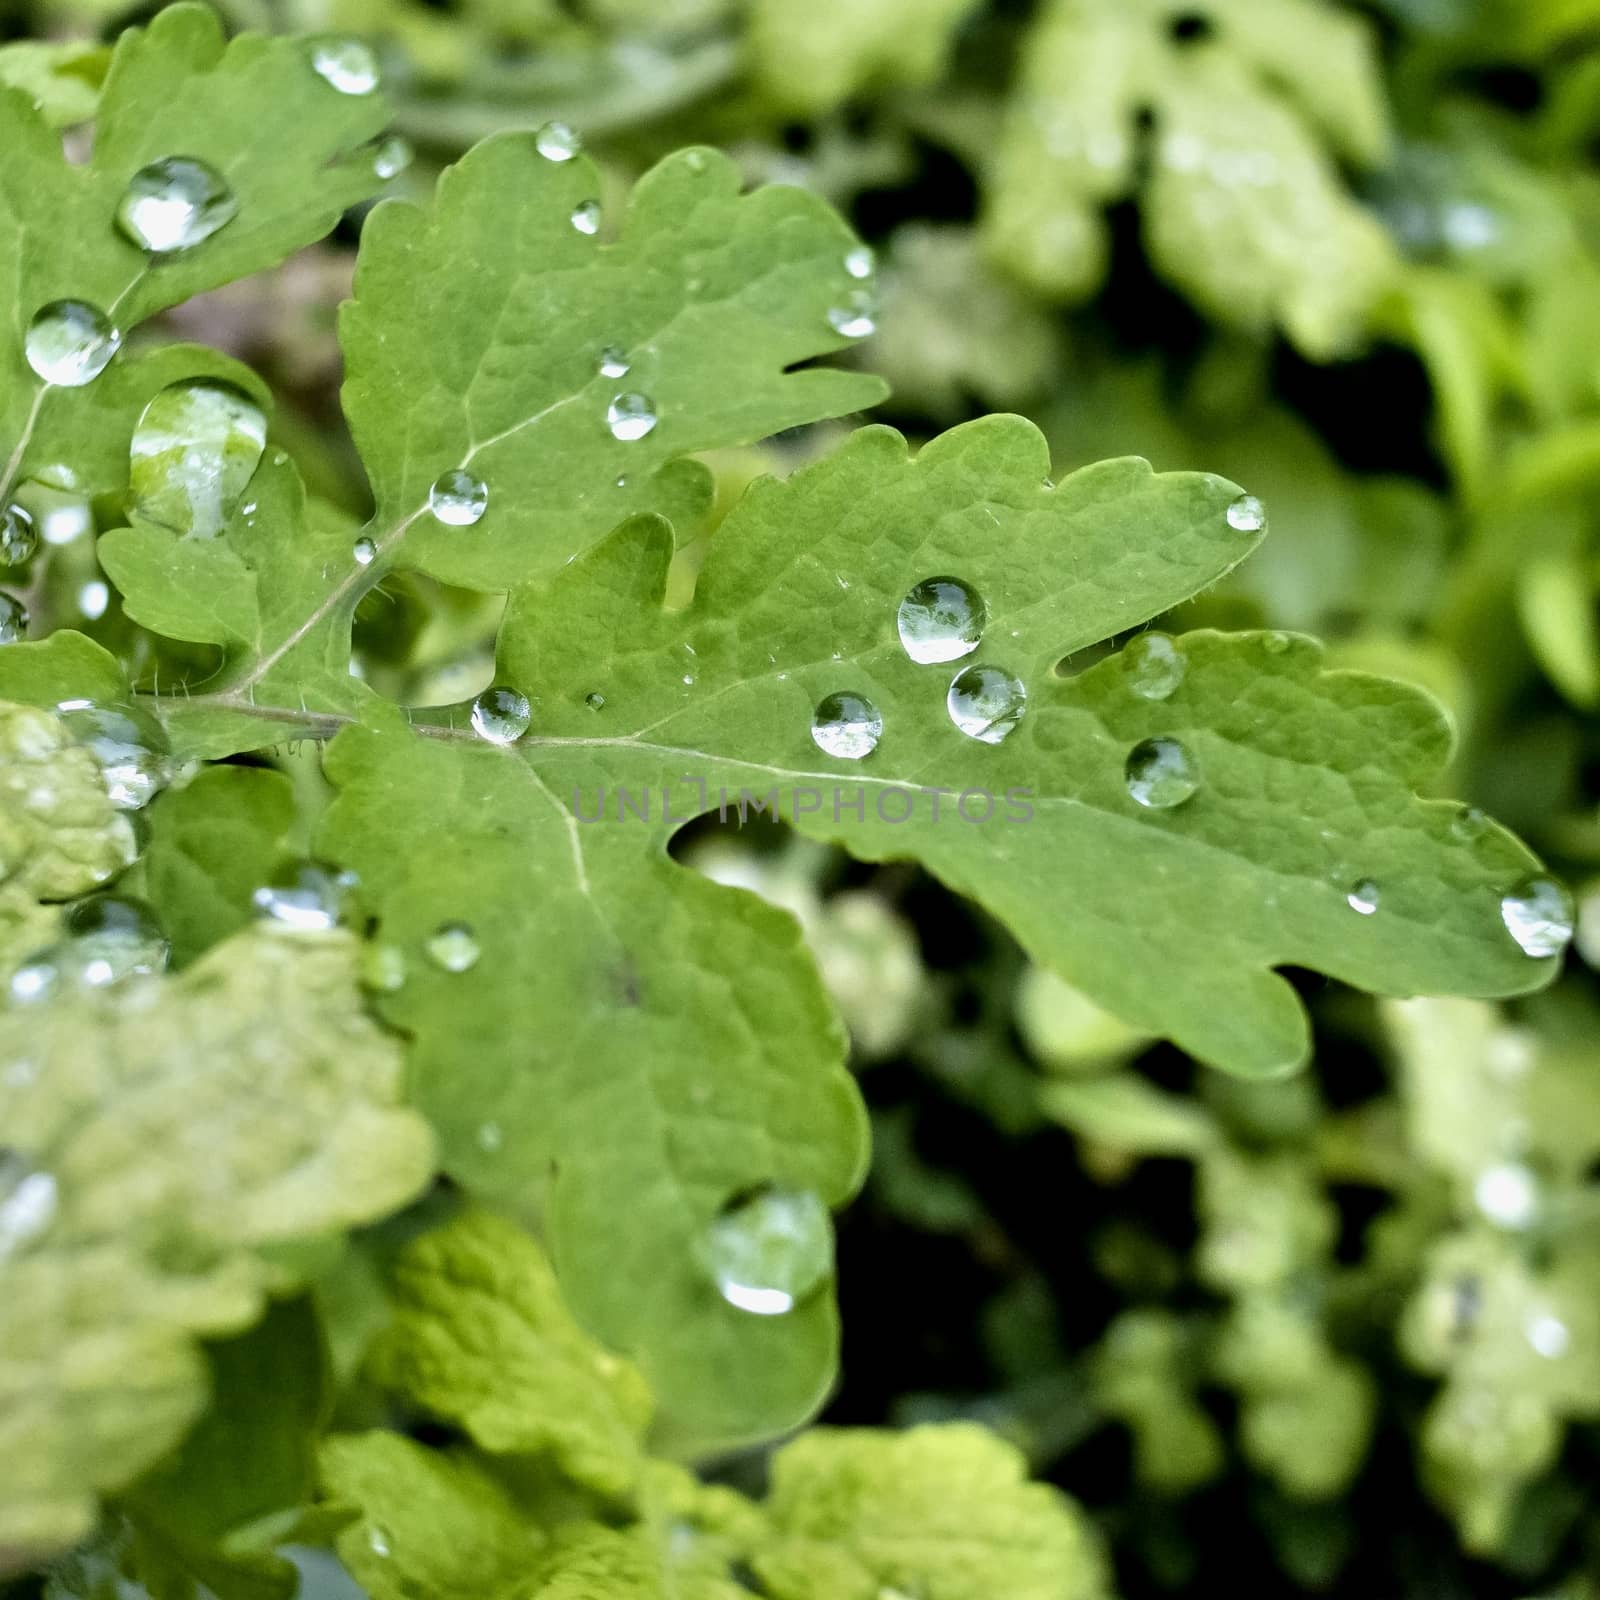 raindrops on green leaf by valerypetr